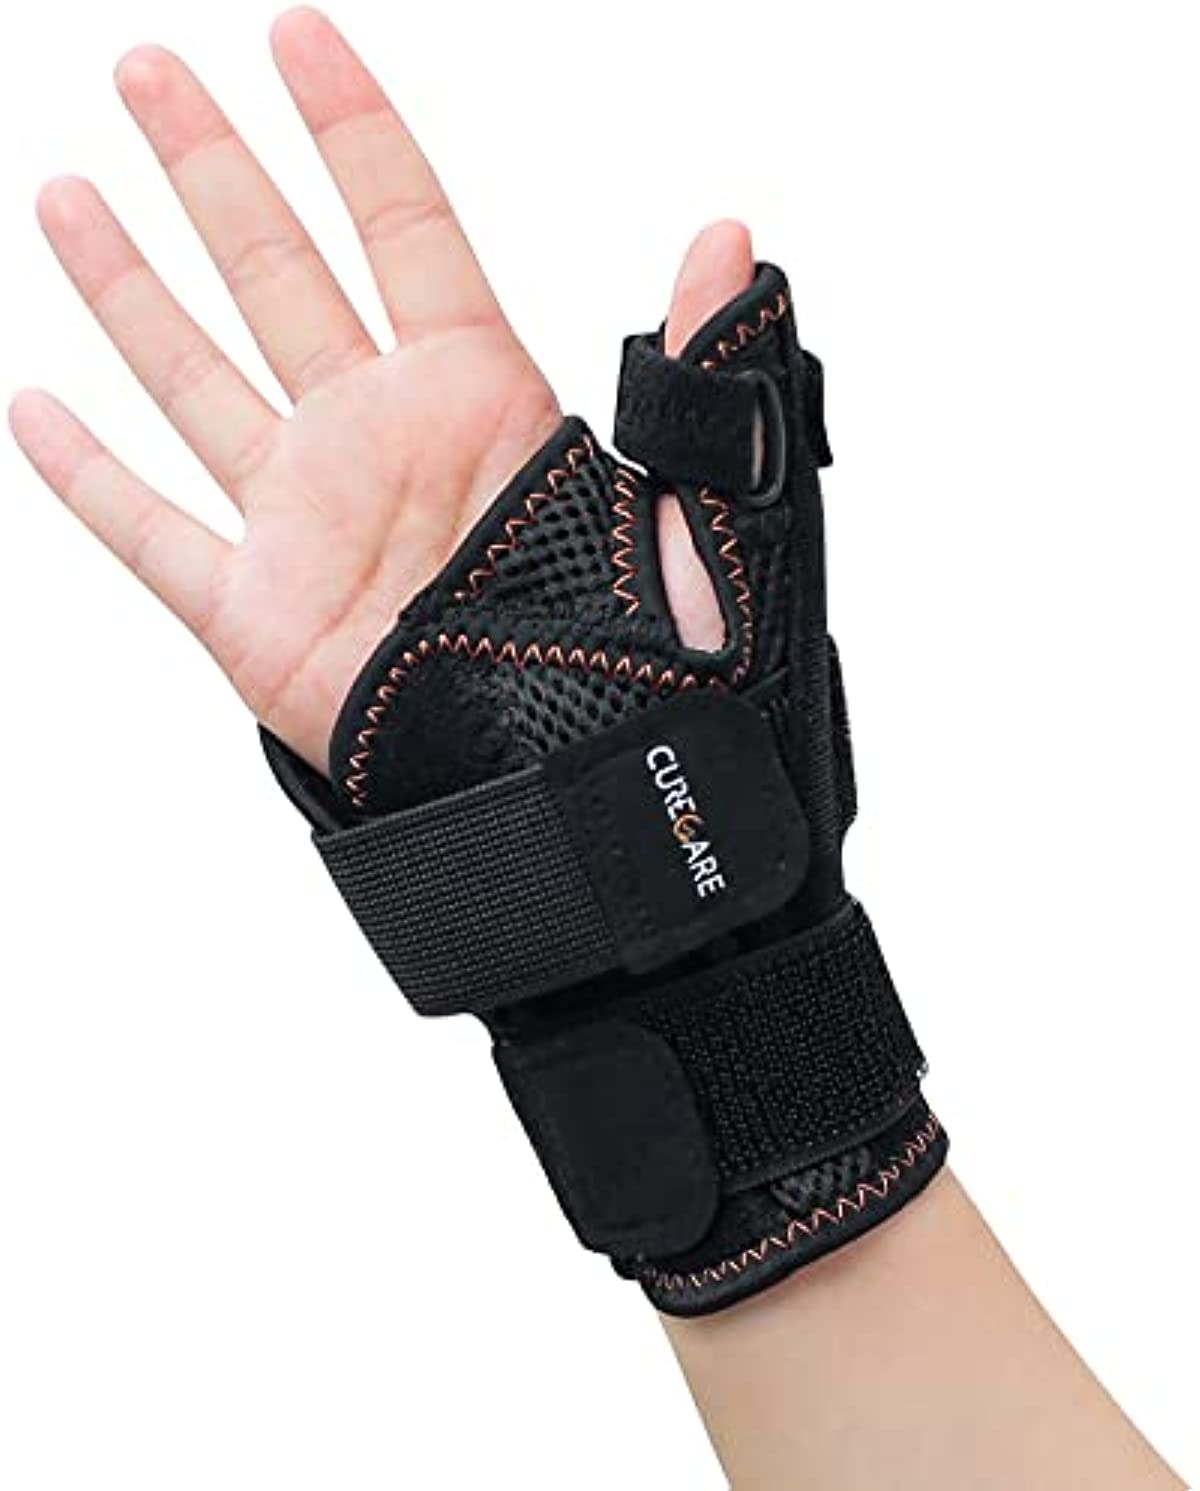 2022 New Updated Thumb Brace for Women and Men, Reversible Trigger Thumb Splint for Day & Night Support, Breathable Thumb Stabilizer for Arthritis, Tendonitis, Sprains Thumb Pain Relief (Black)